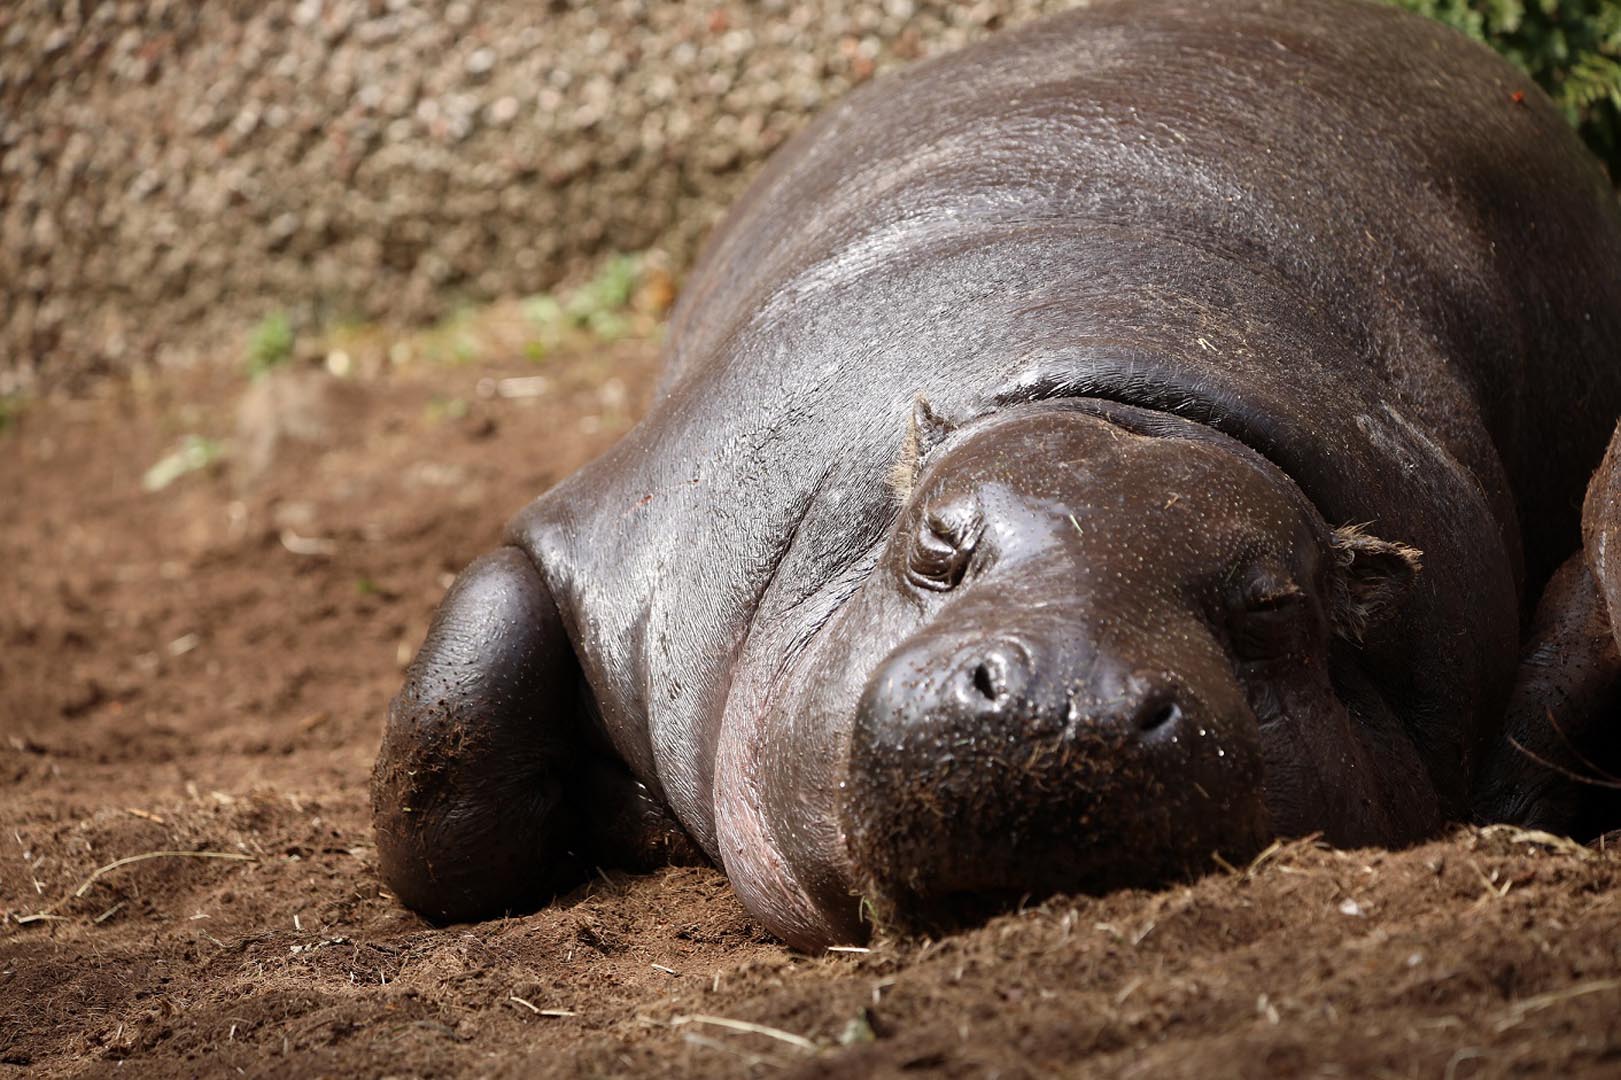 Pygmy hippo Otto asleep in the mud IMAGE: Laura Moore 2021